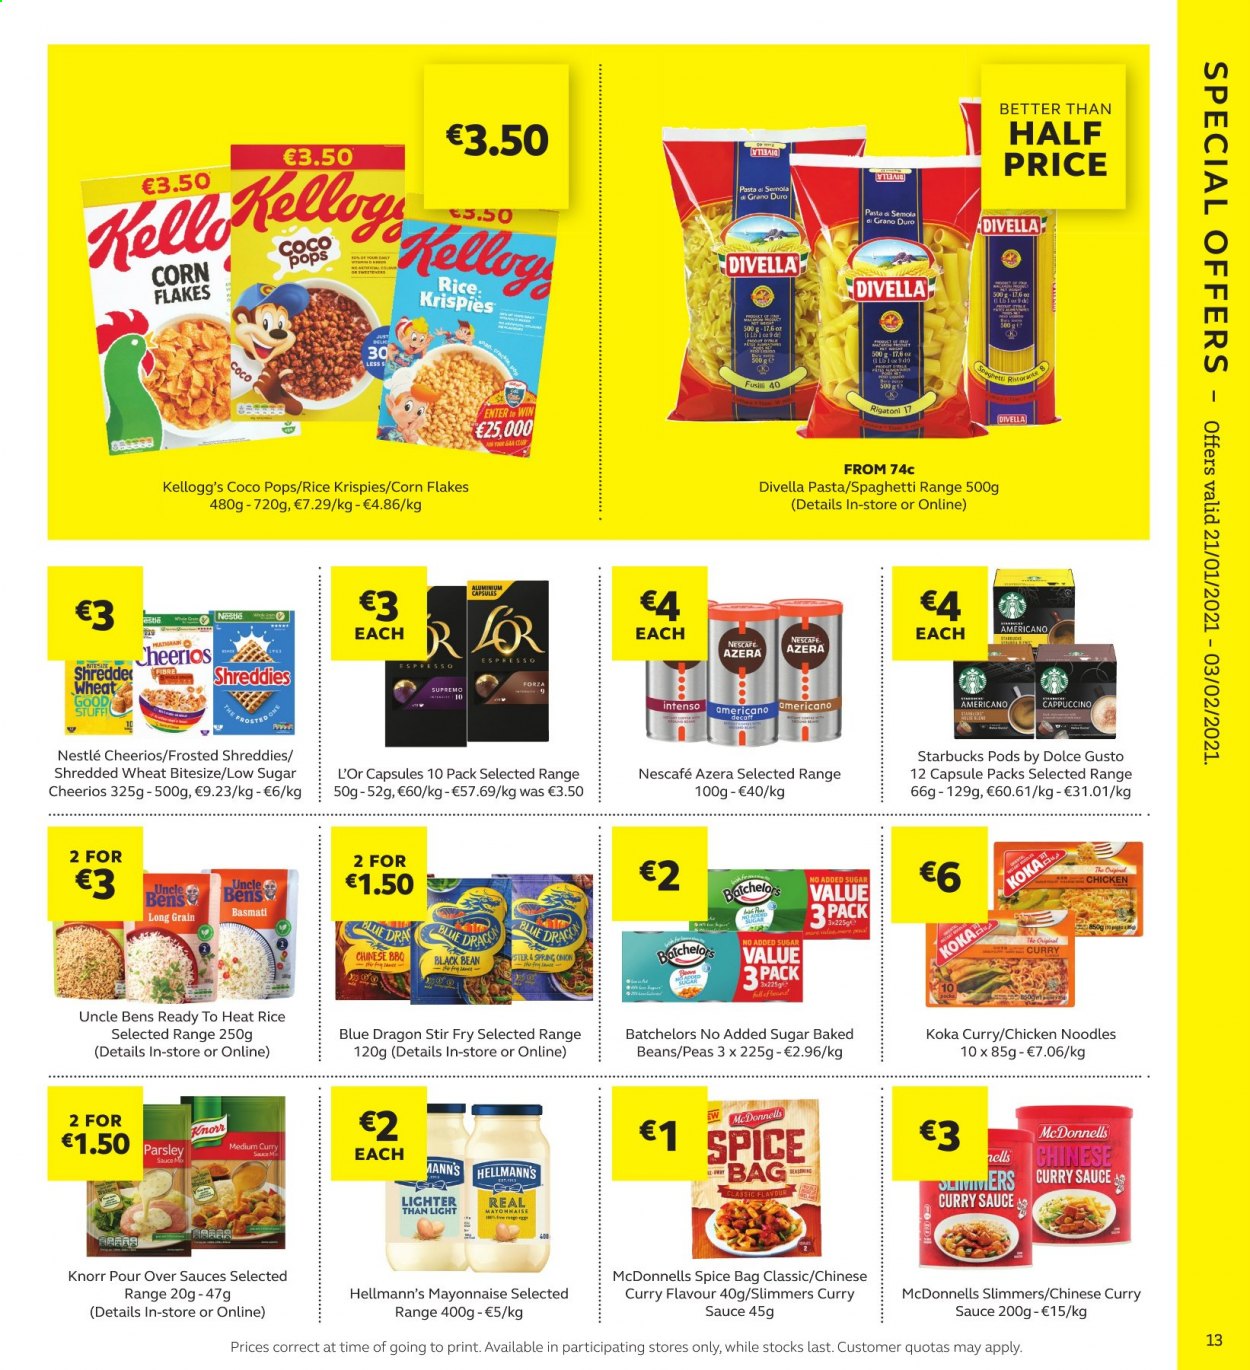 thumbnail - SuperValu offer  - 21.01.2021 - 03.02.2021 - Sales products - beans, peas, Knorr, mayonnaise, Hellmann’s, Nestlé, Kellogg's, baked beans, Uncle Ben's, Cheerios, corn flakes, coco pops, Rice Krispies, basmati rice, spaghetti, pasta, noodles, parsley, cappuccino, Nescafé, Dolce Gusto, L'Or, Starbucks, Intenso. Page 13.